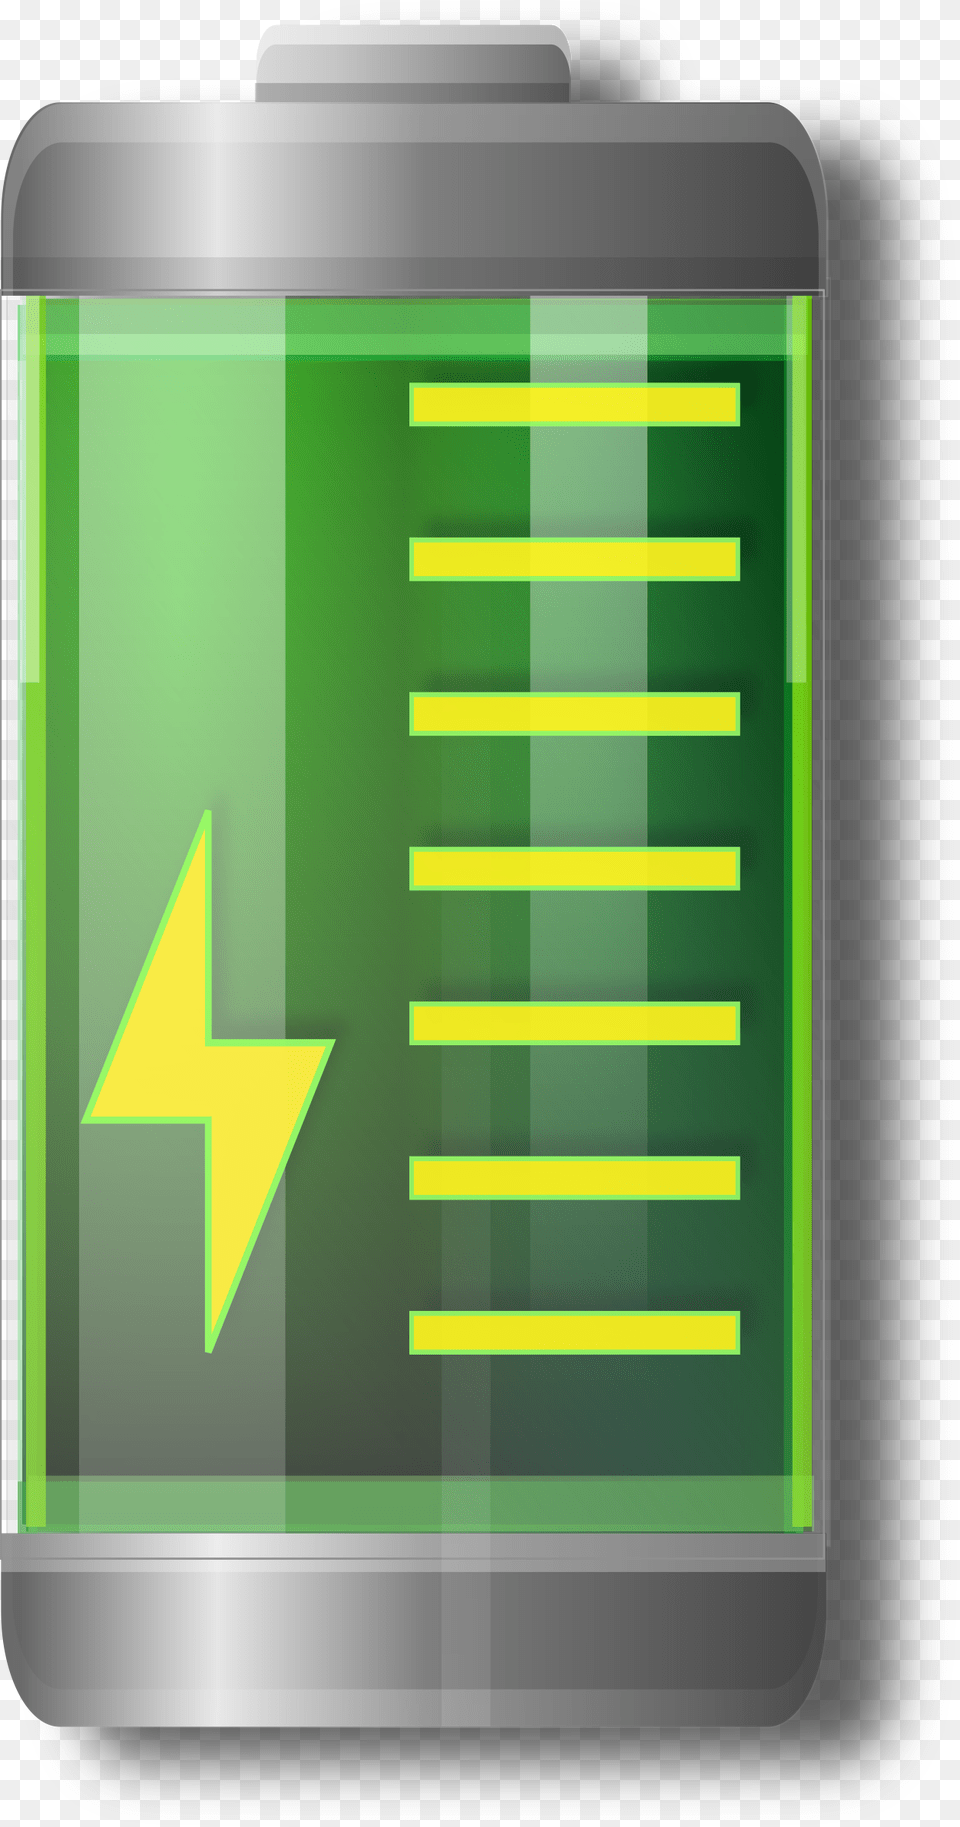 This Icons Design Of Battery Indicator Remix Png Image